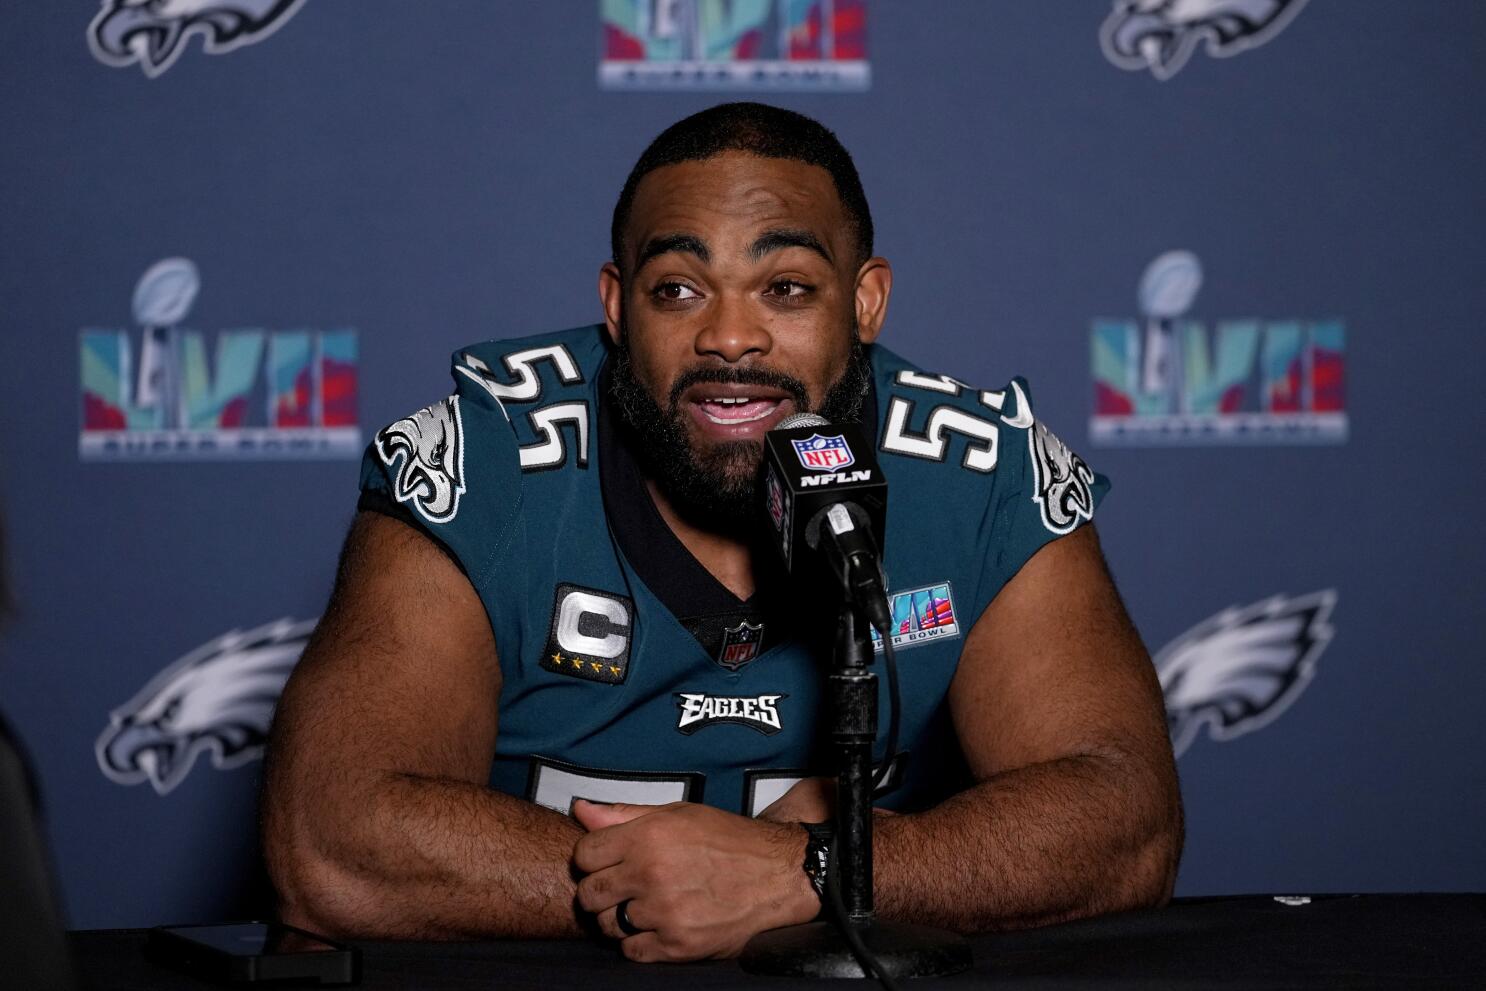 NFC champion Eagles bring back veteran Graham on 1-year deal - The